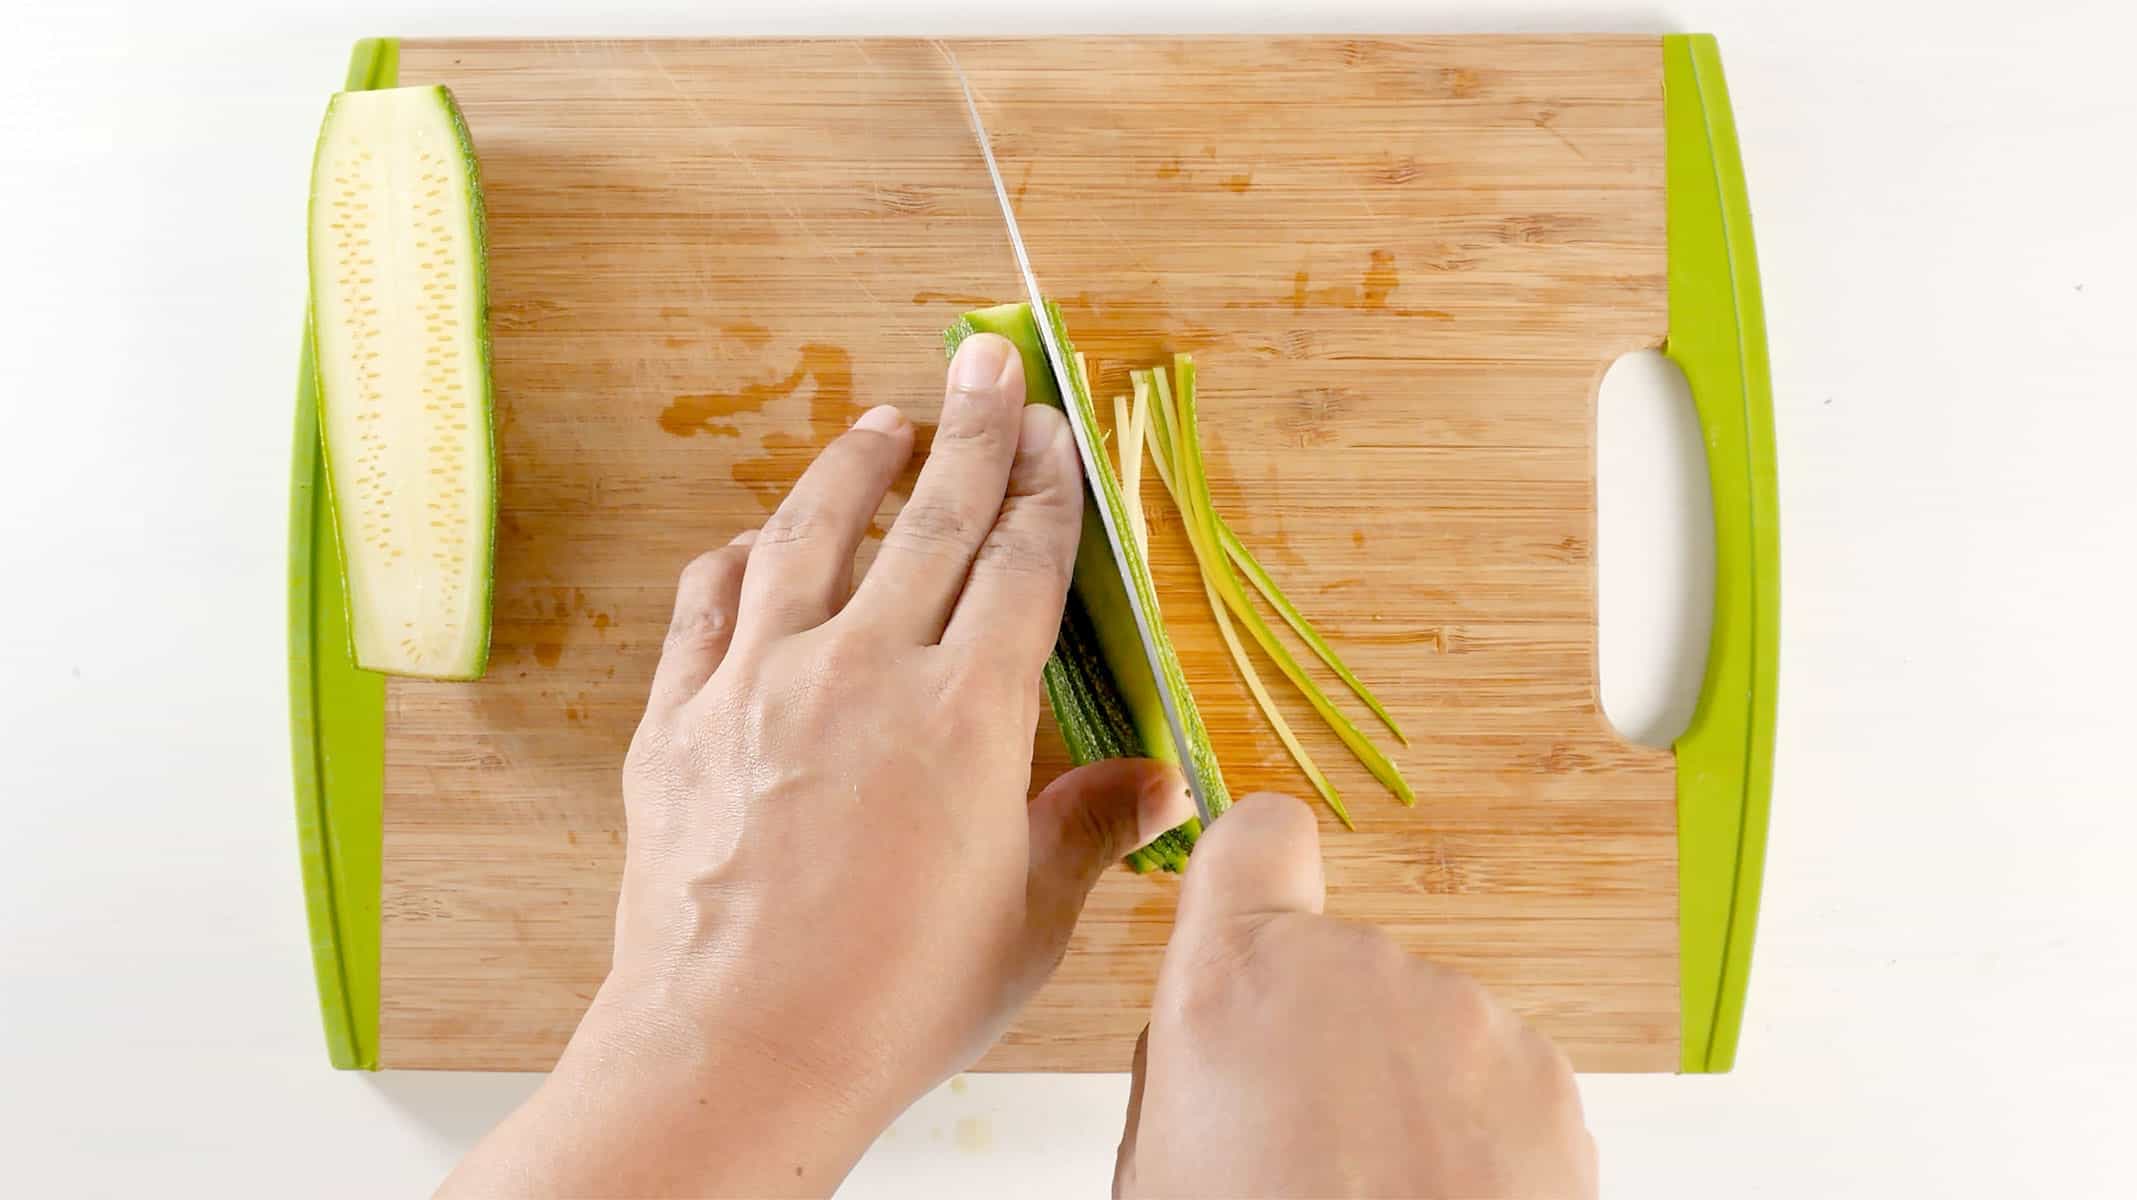 Cutting zoodles with a knife.